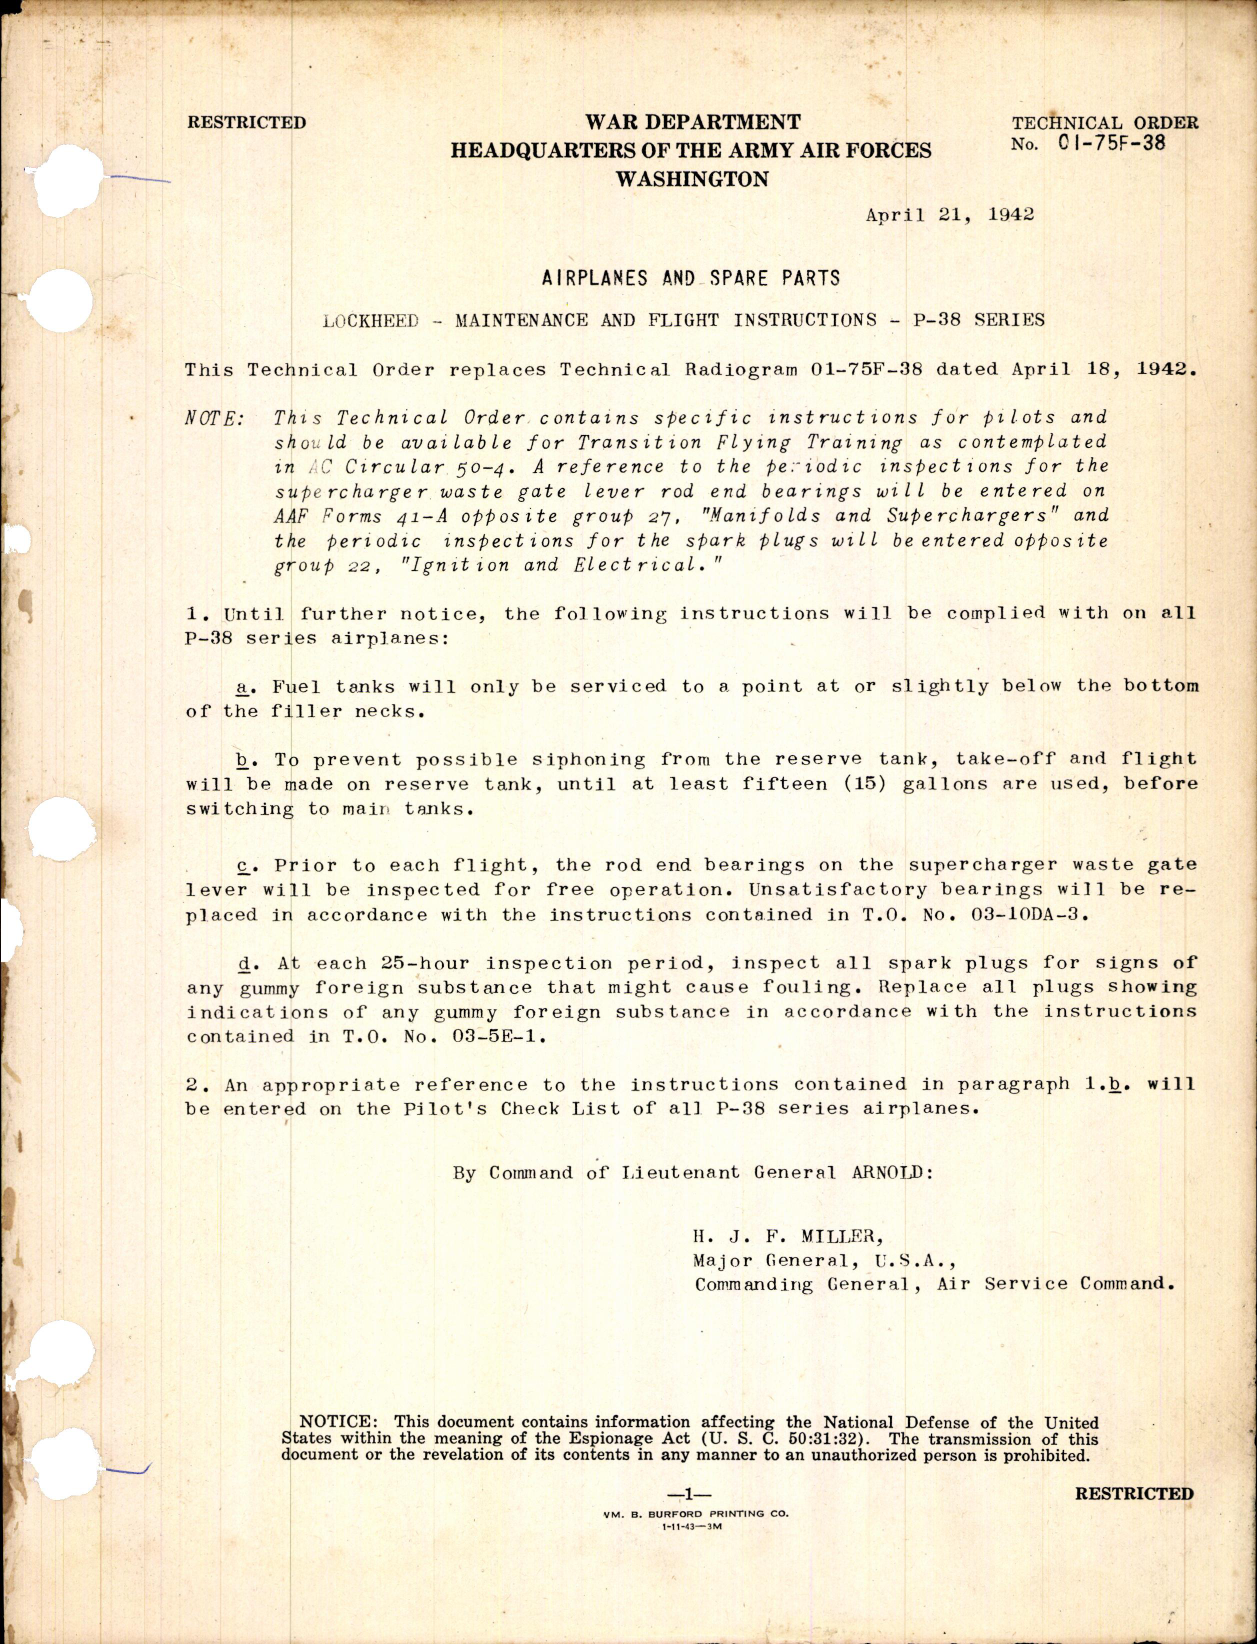 Sample page 1 from AirCorps Library document: Maintenance and Flight Instructions for P-38 Series